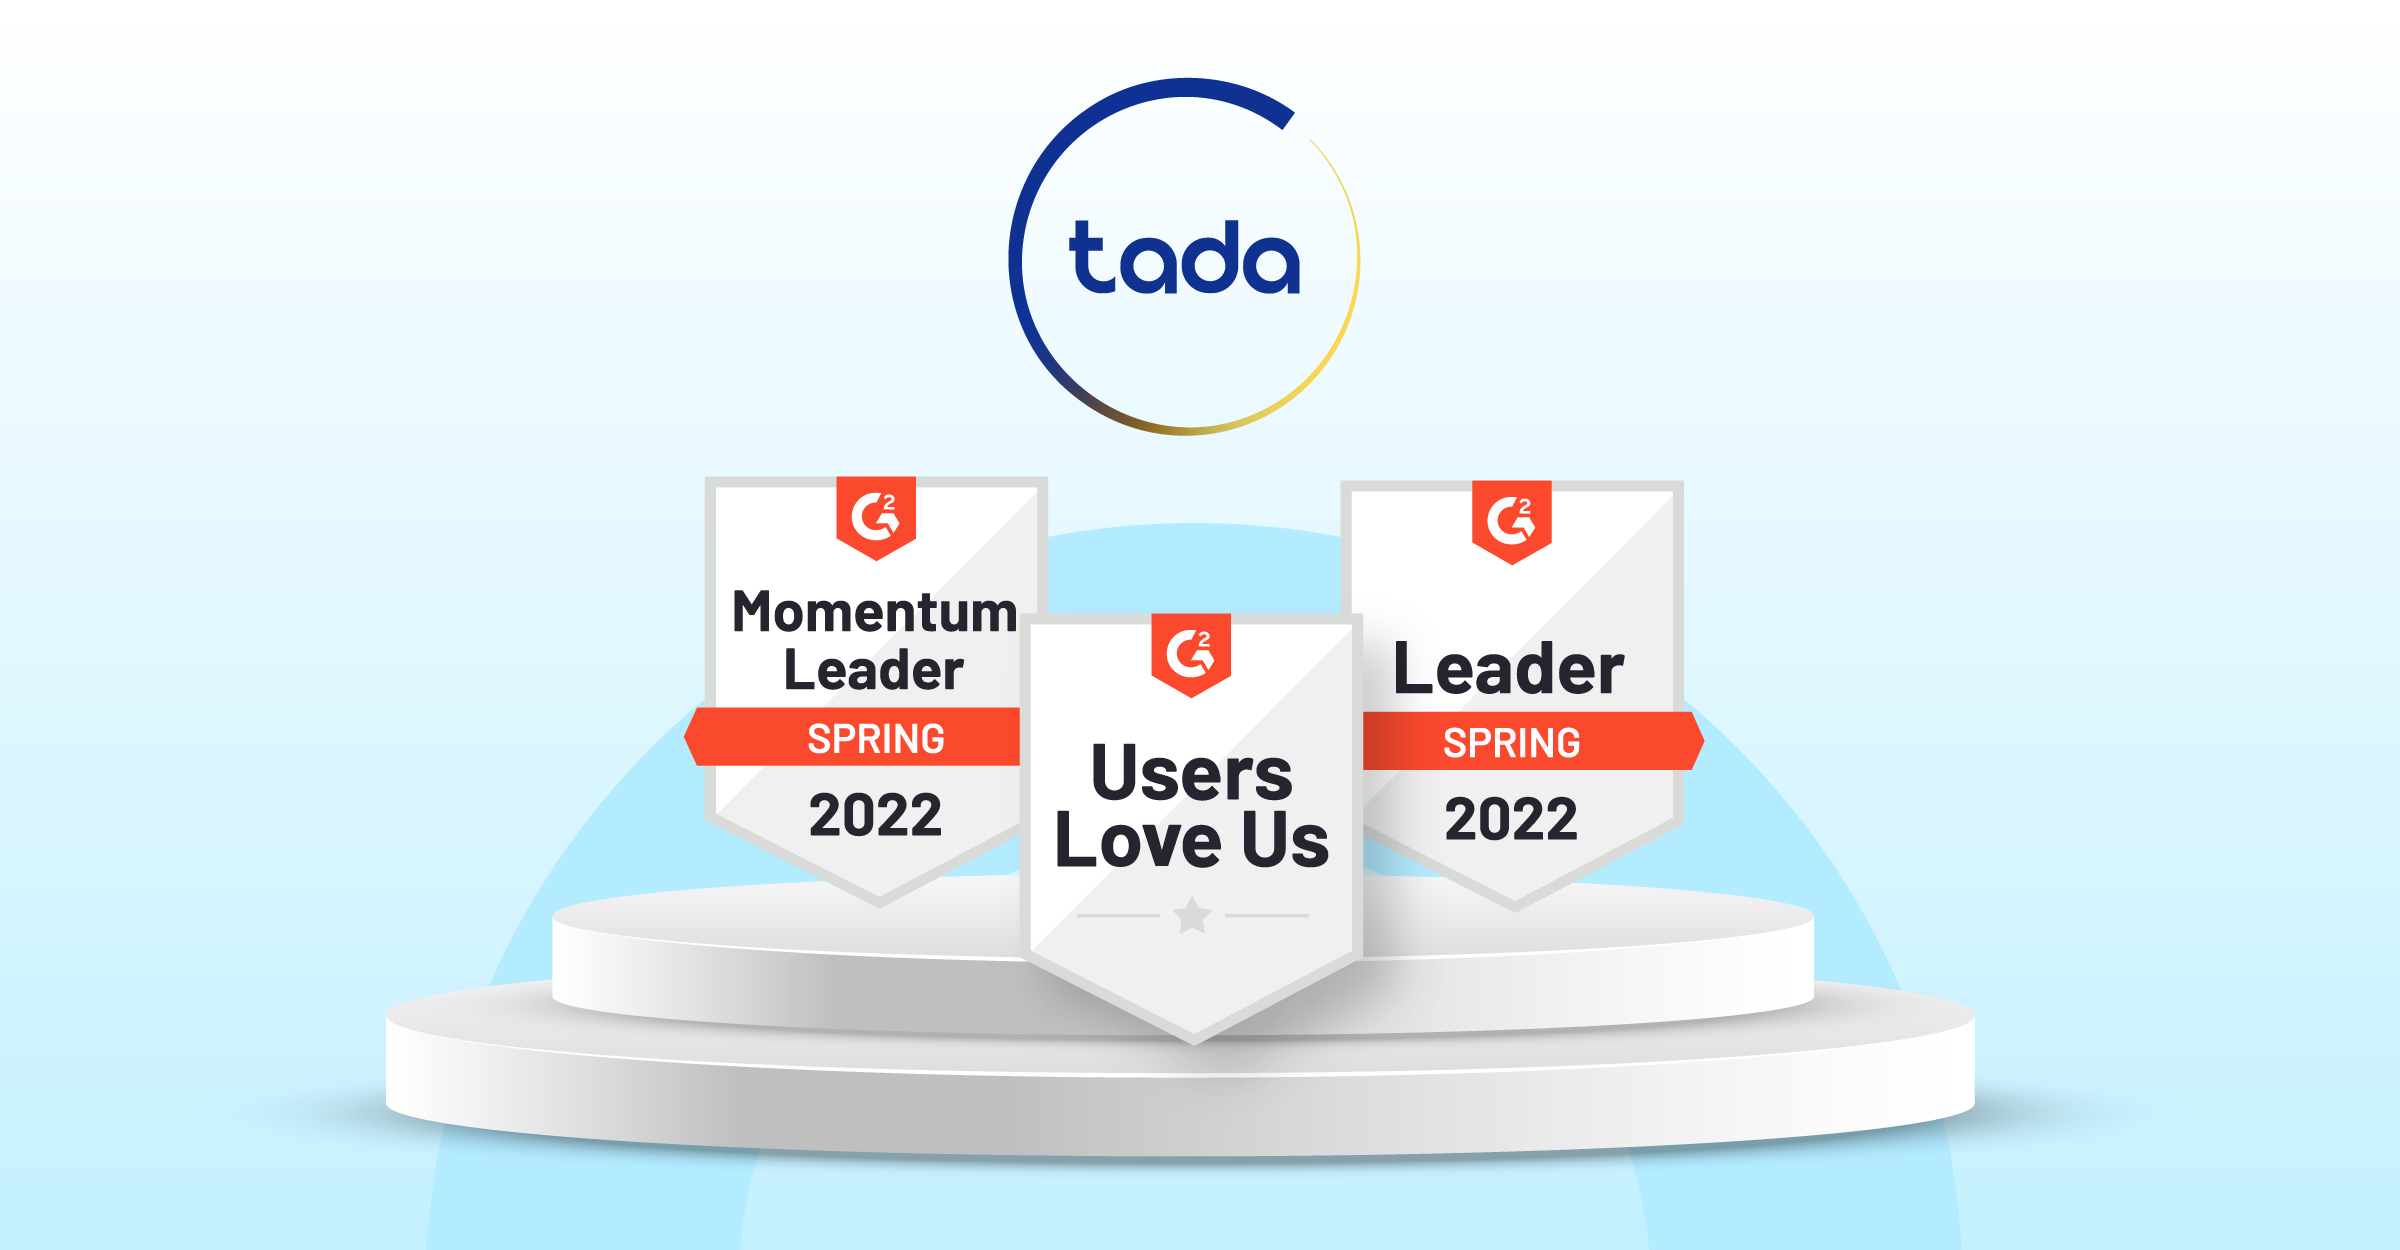 Tada Named a Leader in G2 Spring 2022 Report